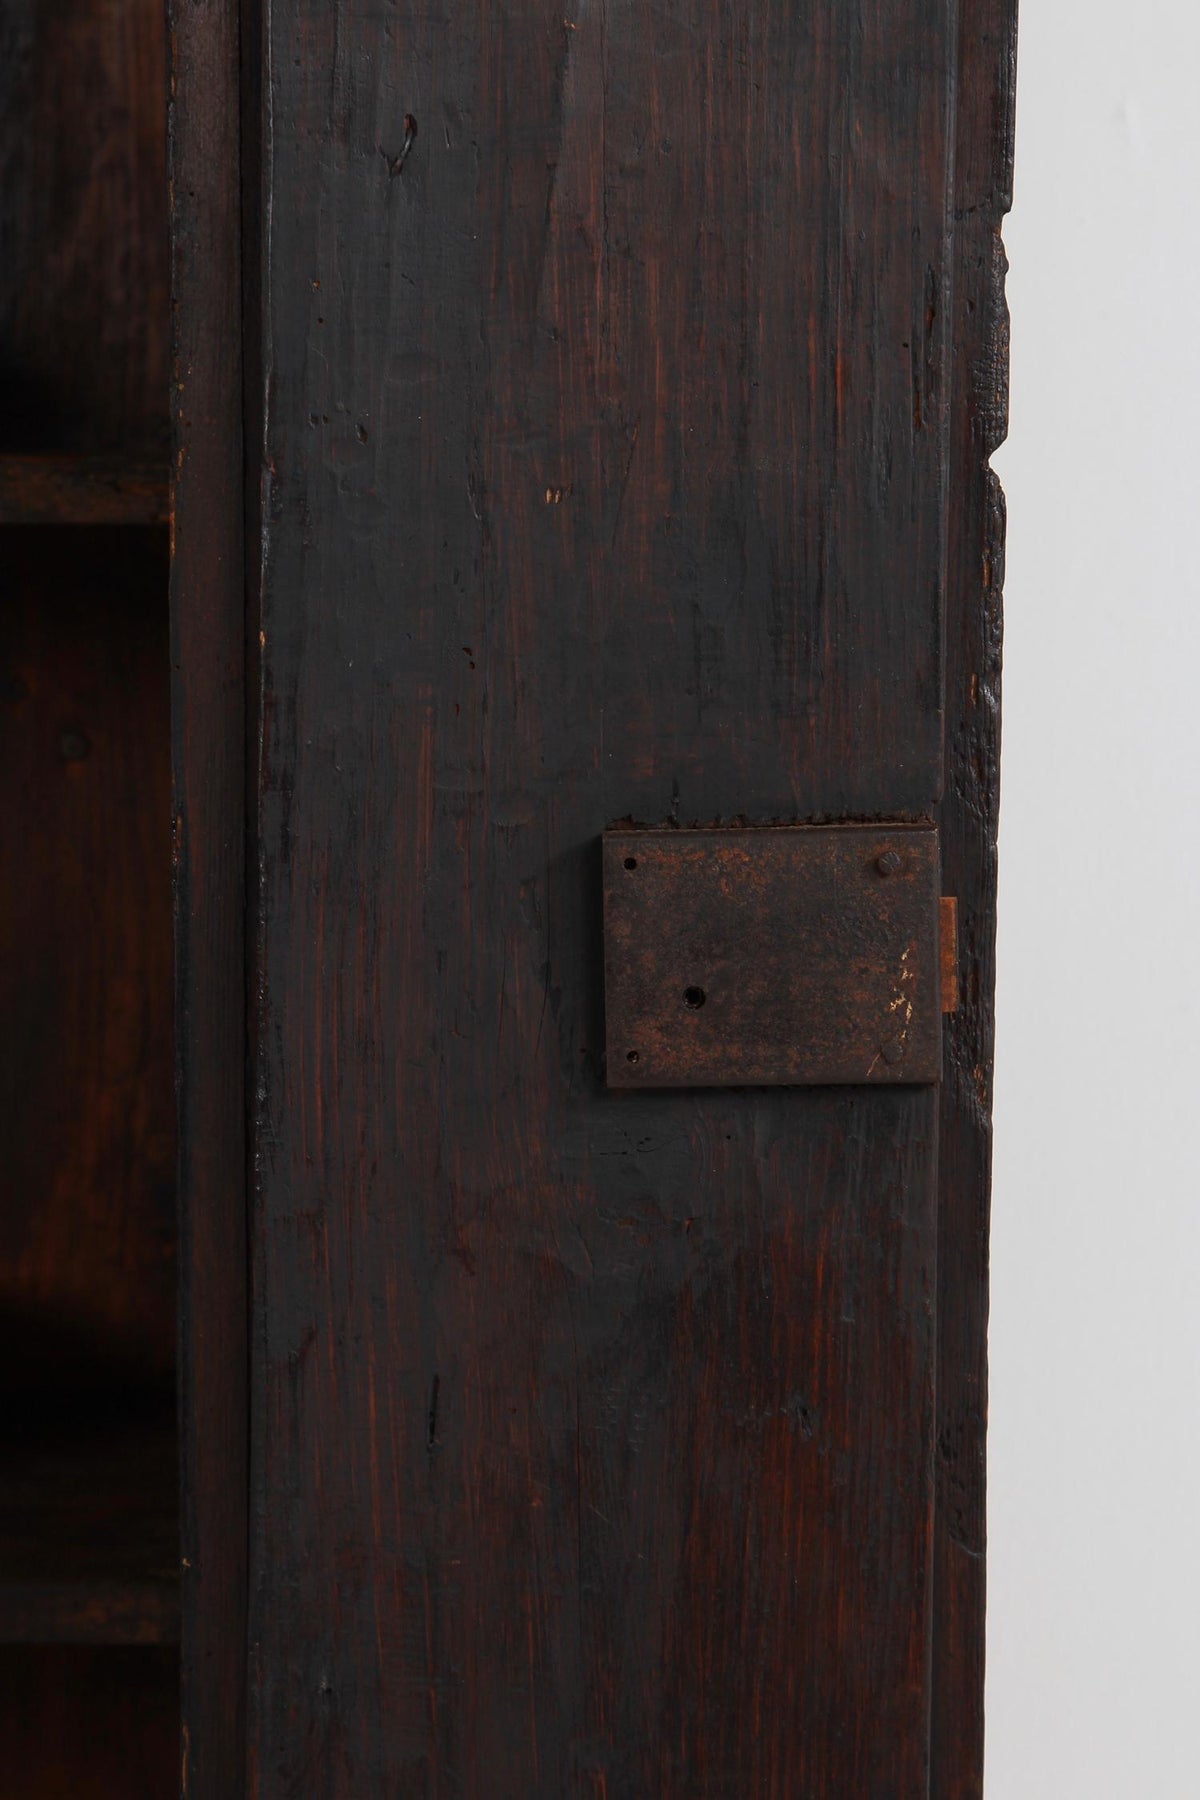 Exceptional Primitive Spanish Mountain Cupboard in Striking Black Patina